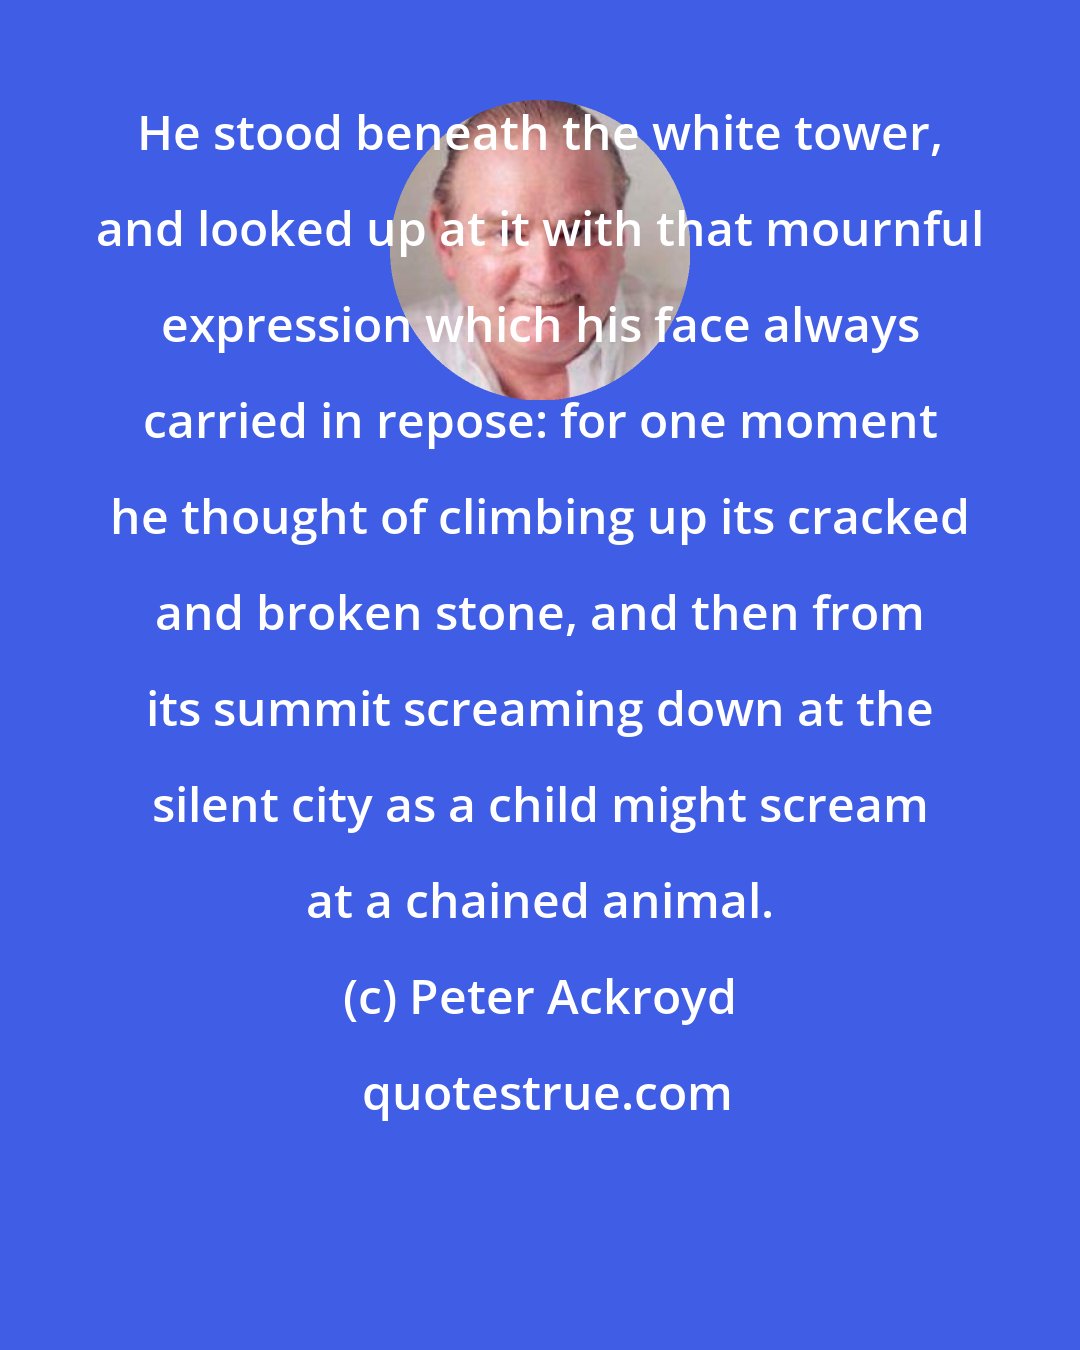 Peter Ackroyd: He stood beneath the white tower, and looked up at it with that mournful expression which his face always carried in repose: for one moment he thought of climbing up its cracked and broken stone, and then from its summit screaming down at the silent city as a child might scream at a chained animal.